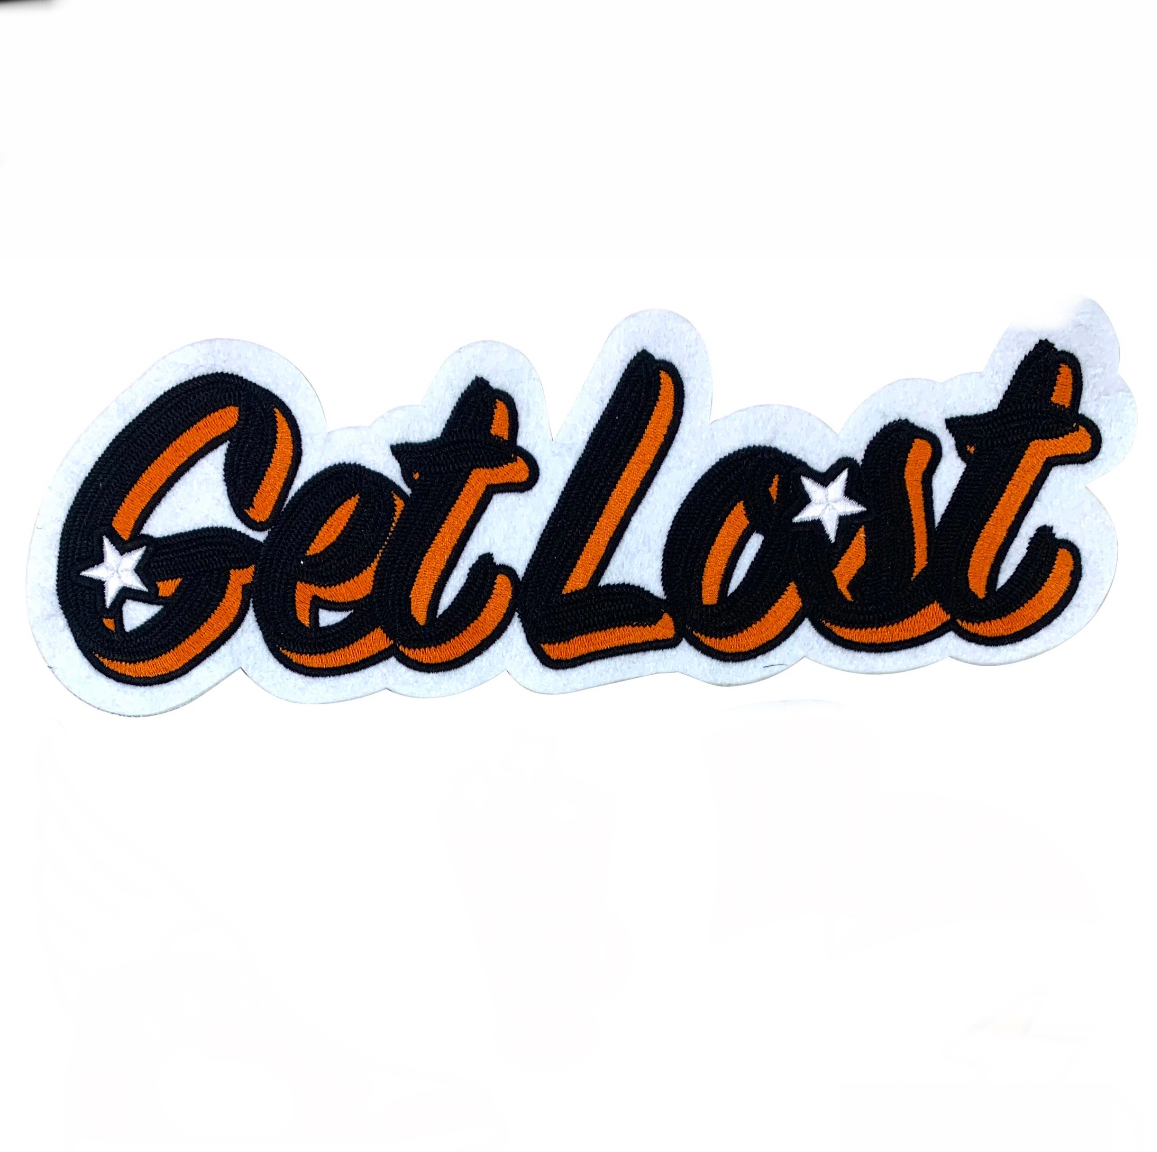 Get lost iron on embroidery patches